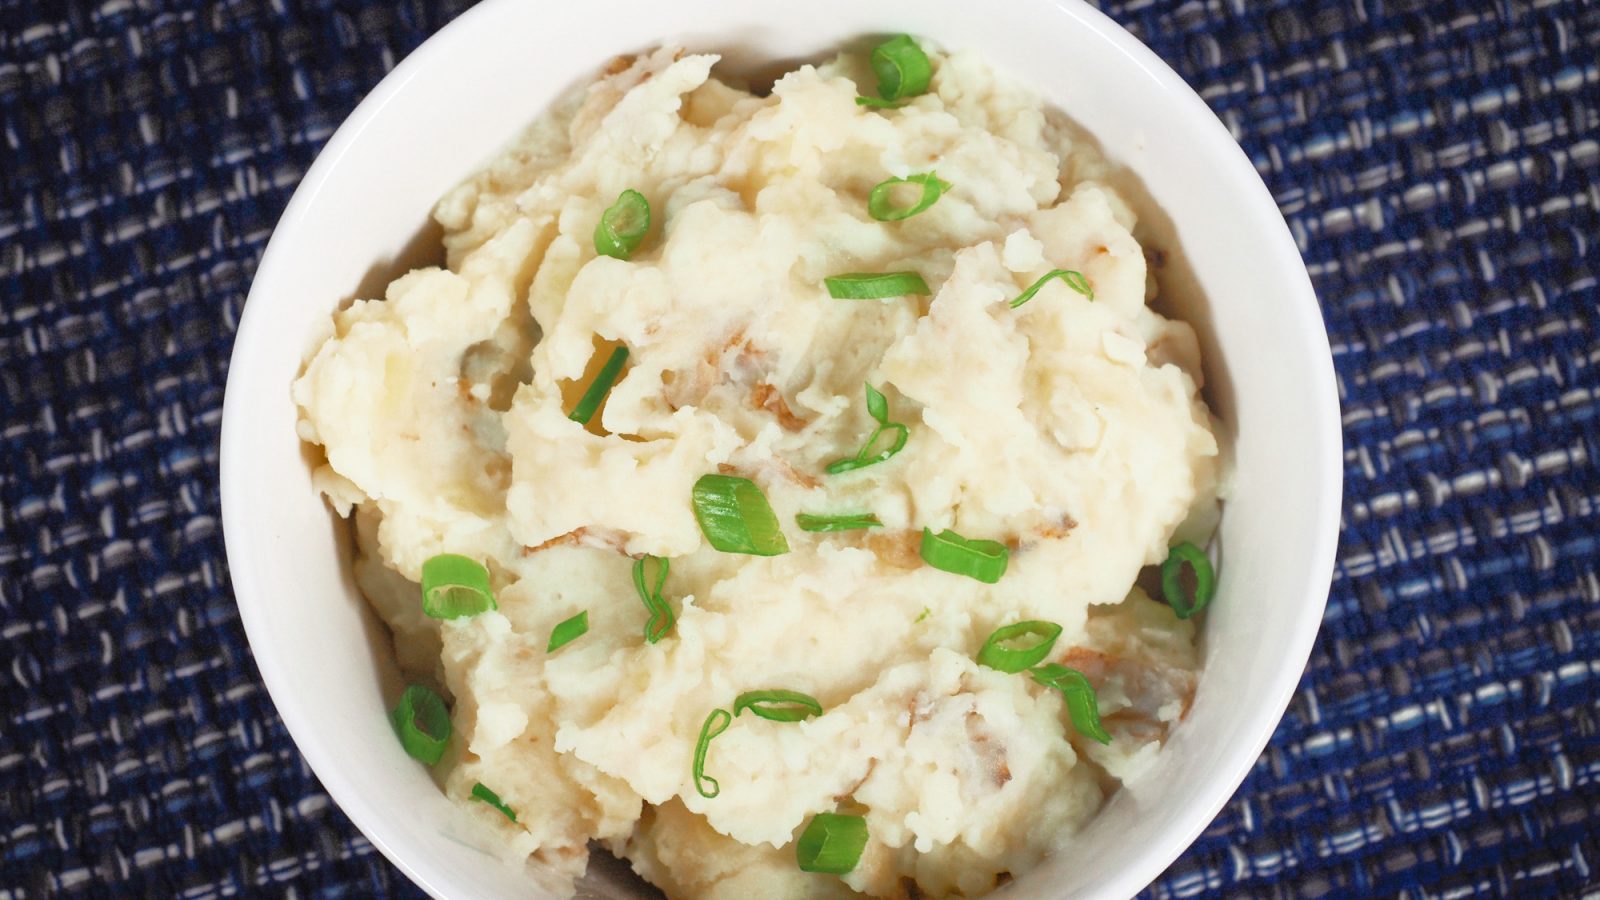 vegan mashed potatoes recipe with green onions